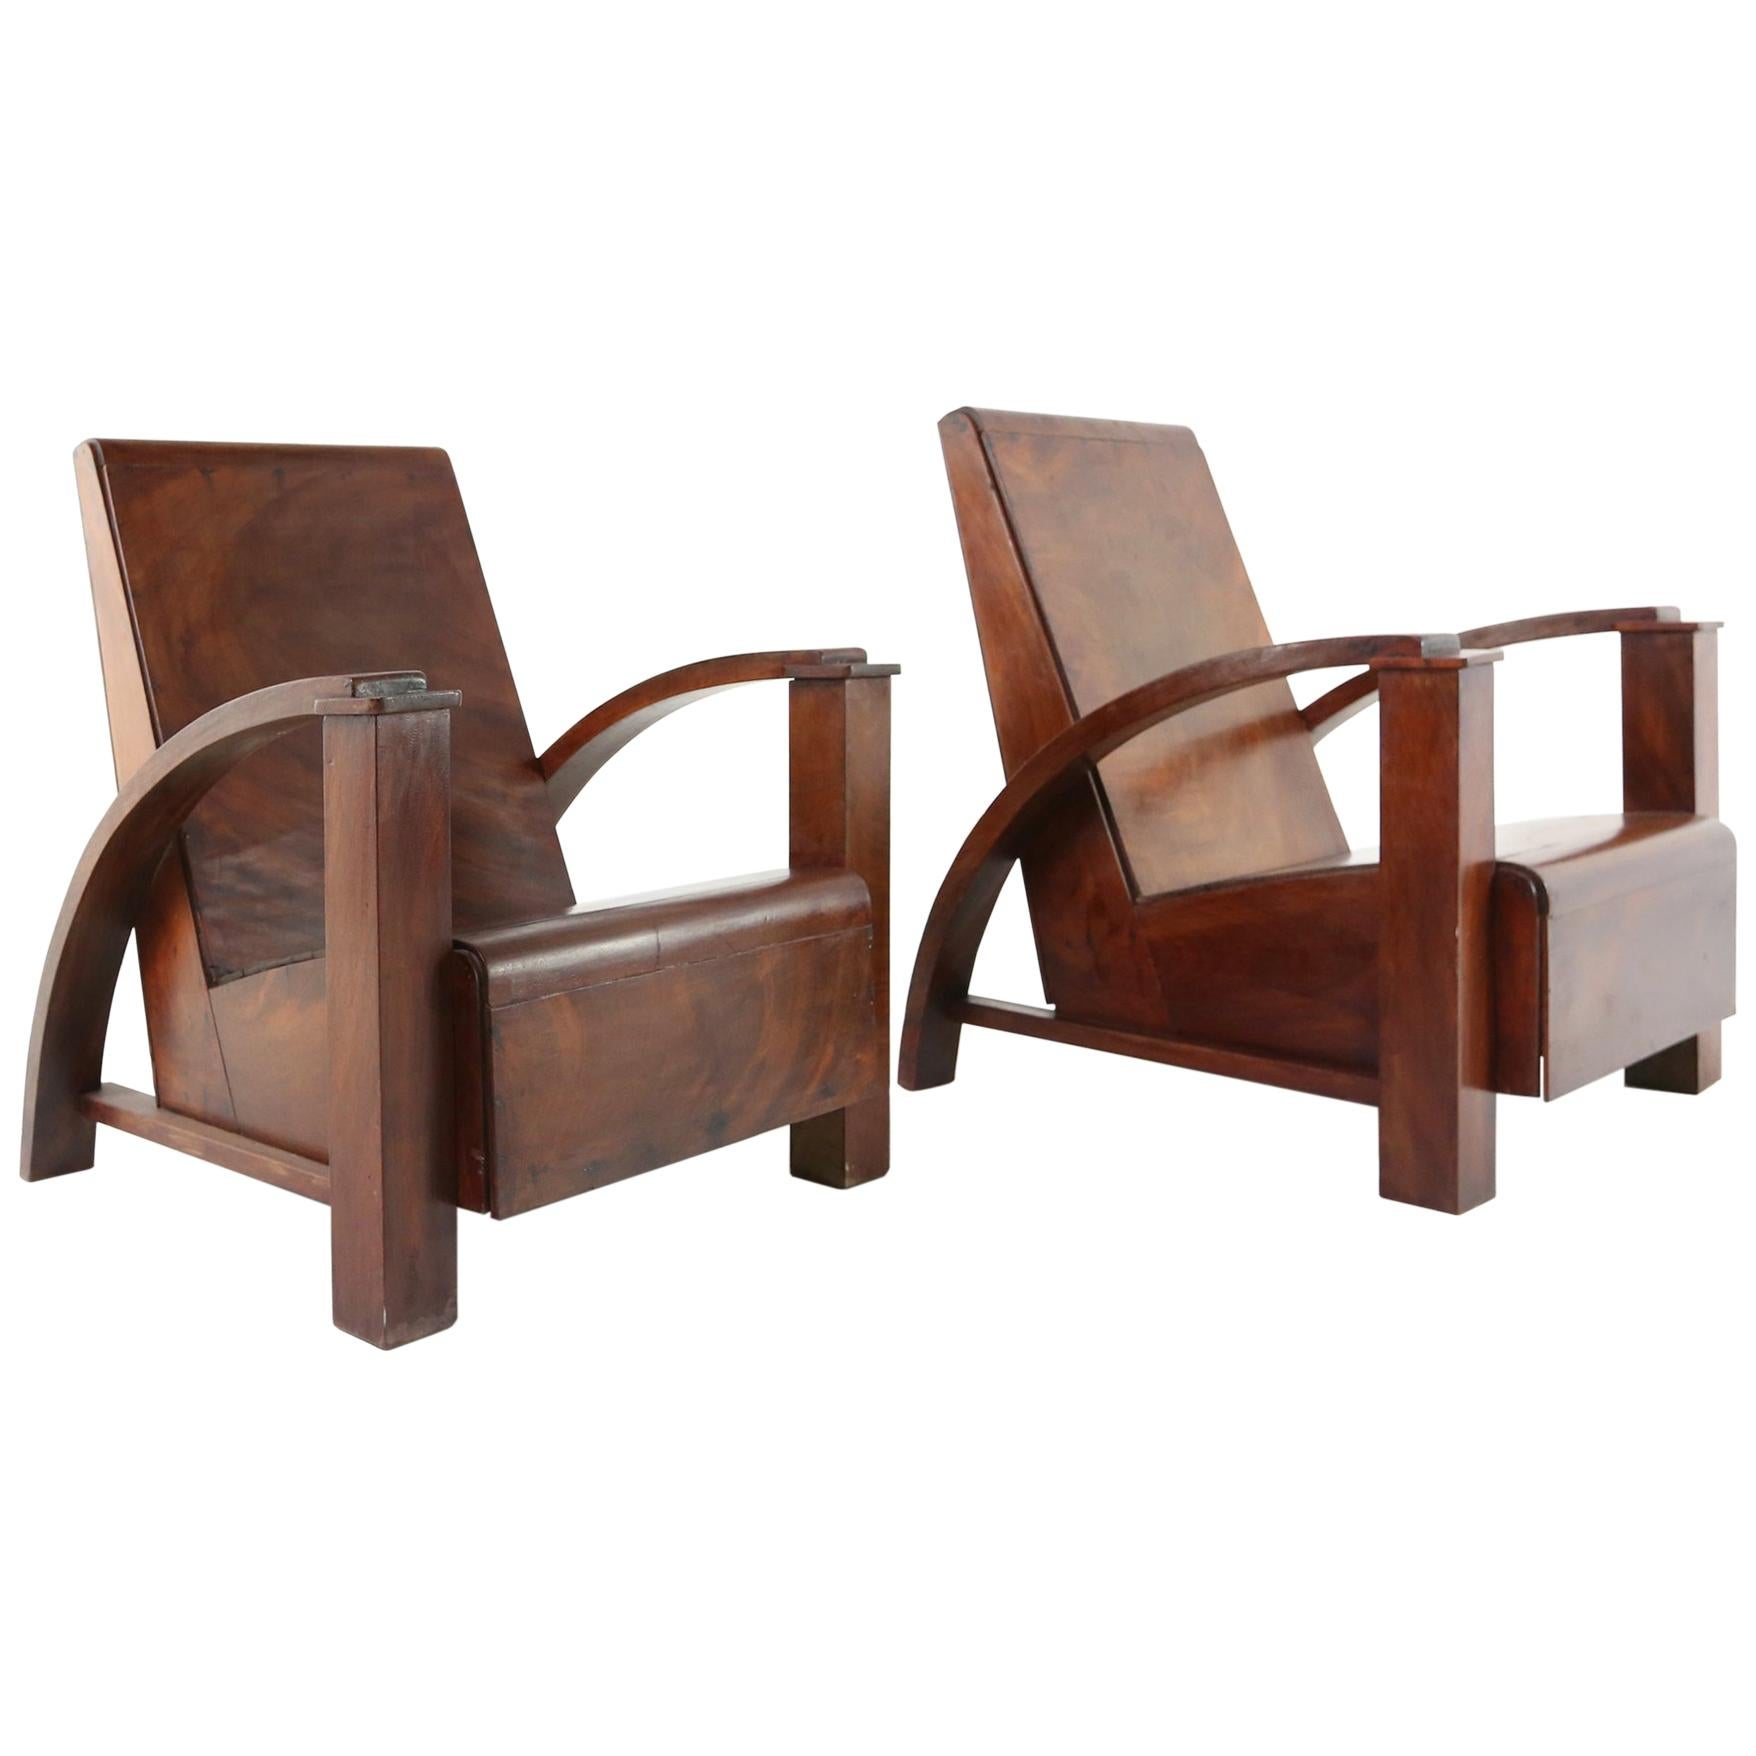 French Modernist Colonial Lounge Chairs in Mahogany, circa 1940s